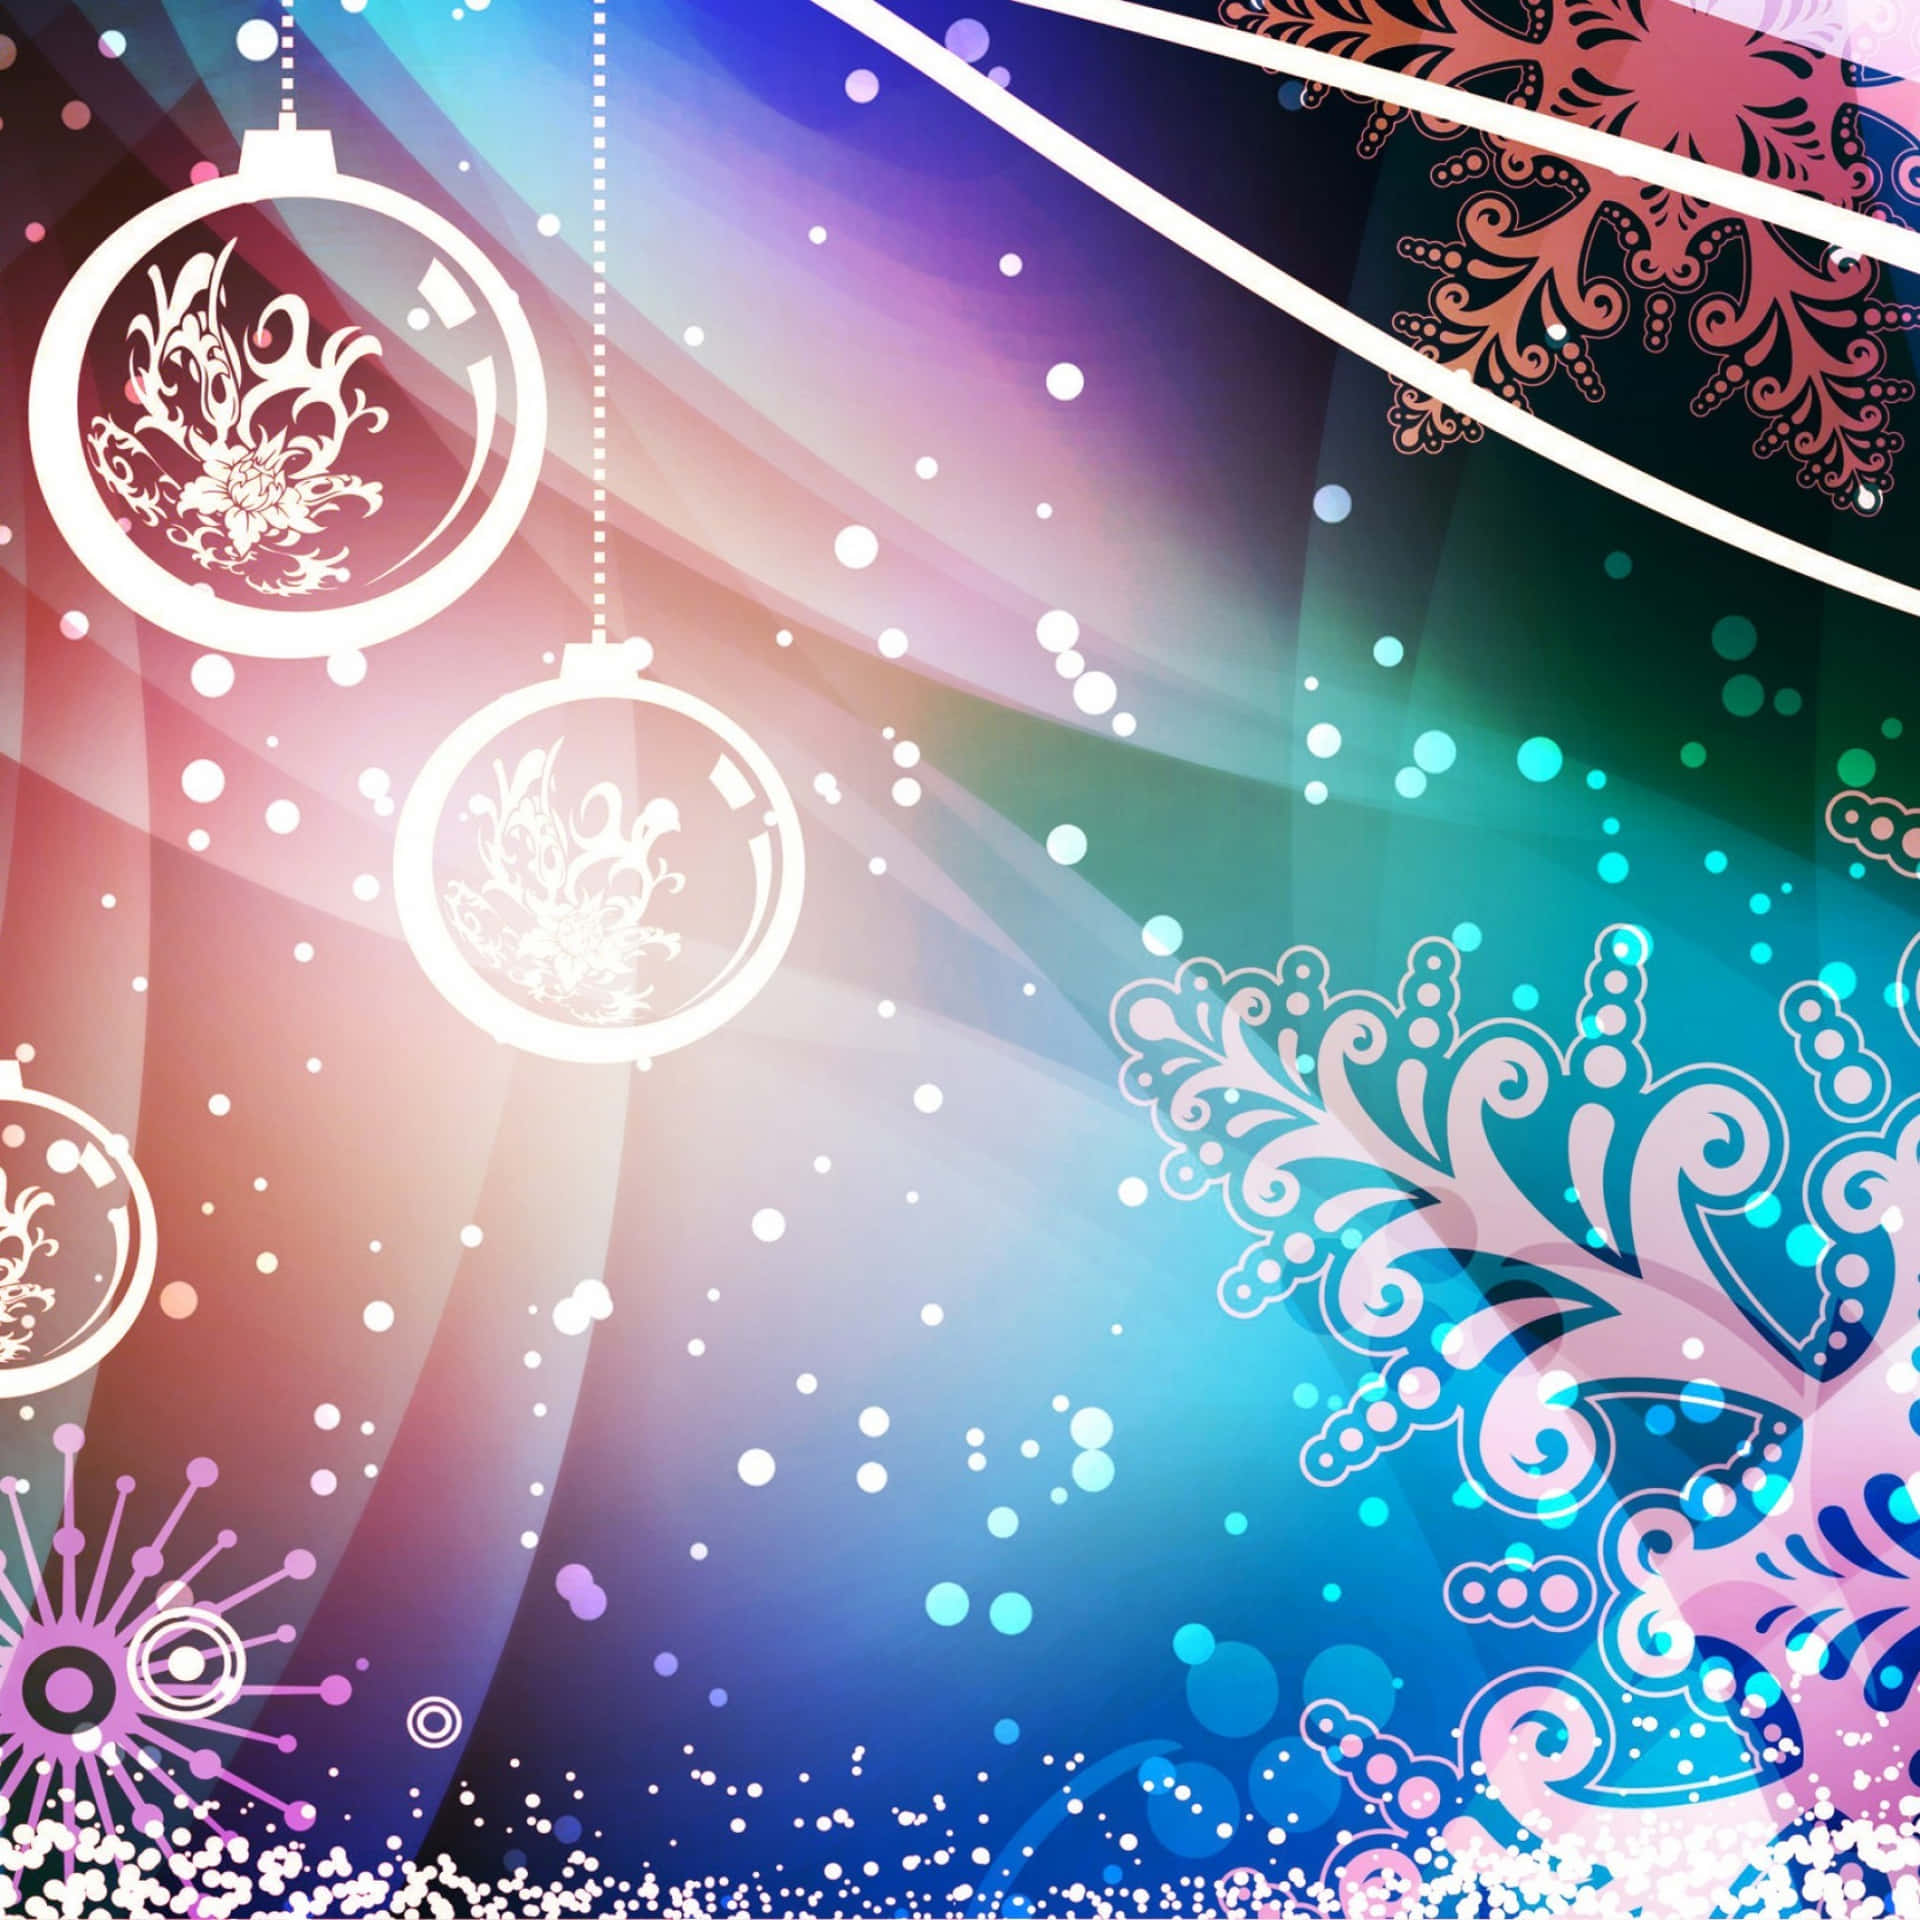 Spread the holiday cheer with an iPad Wallpaper